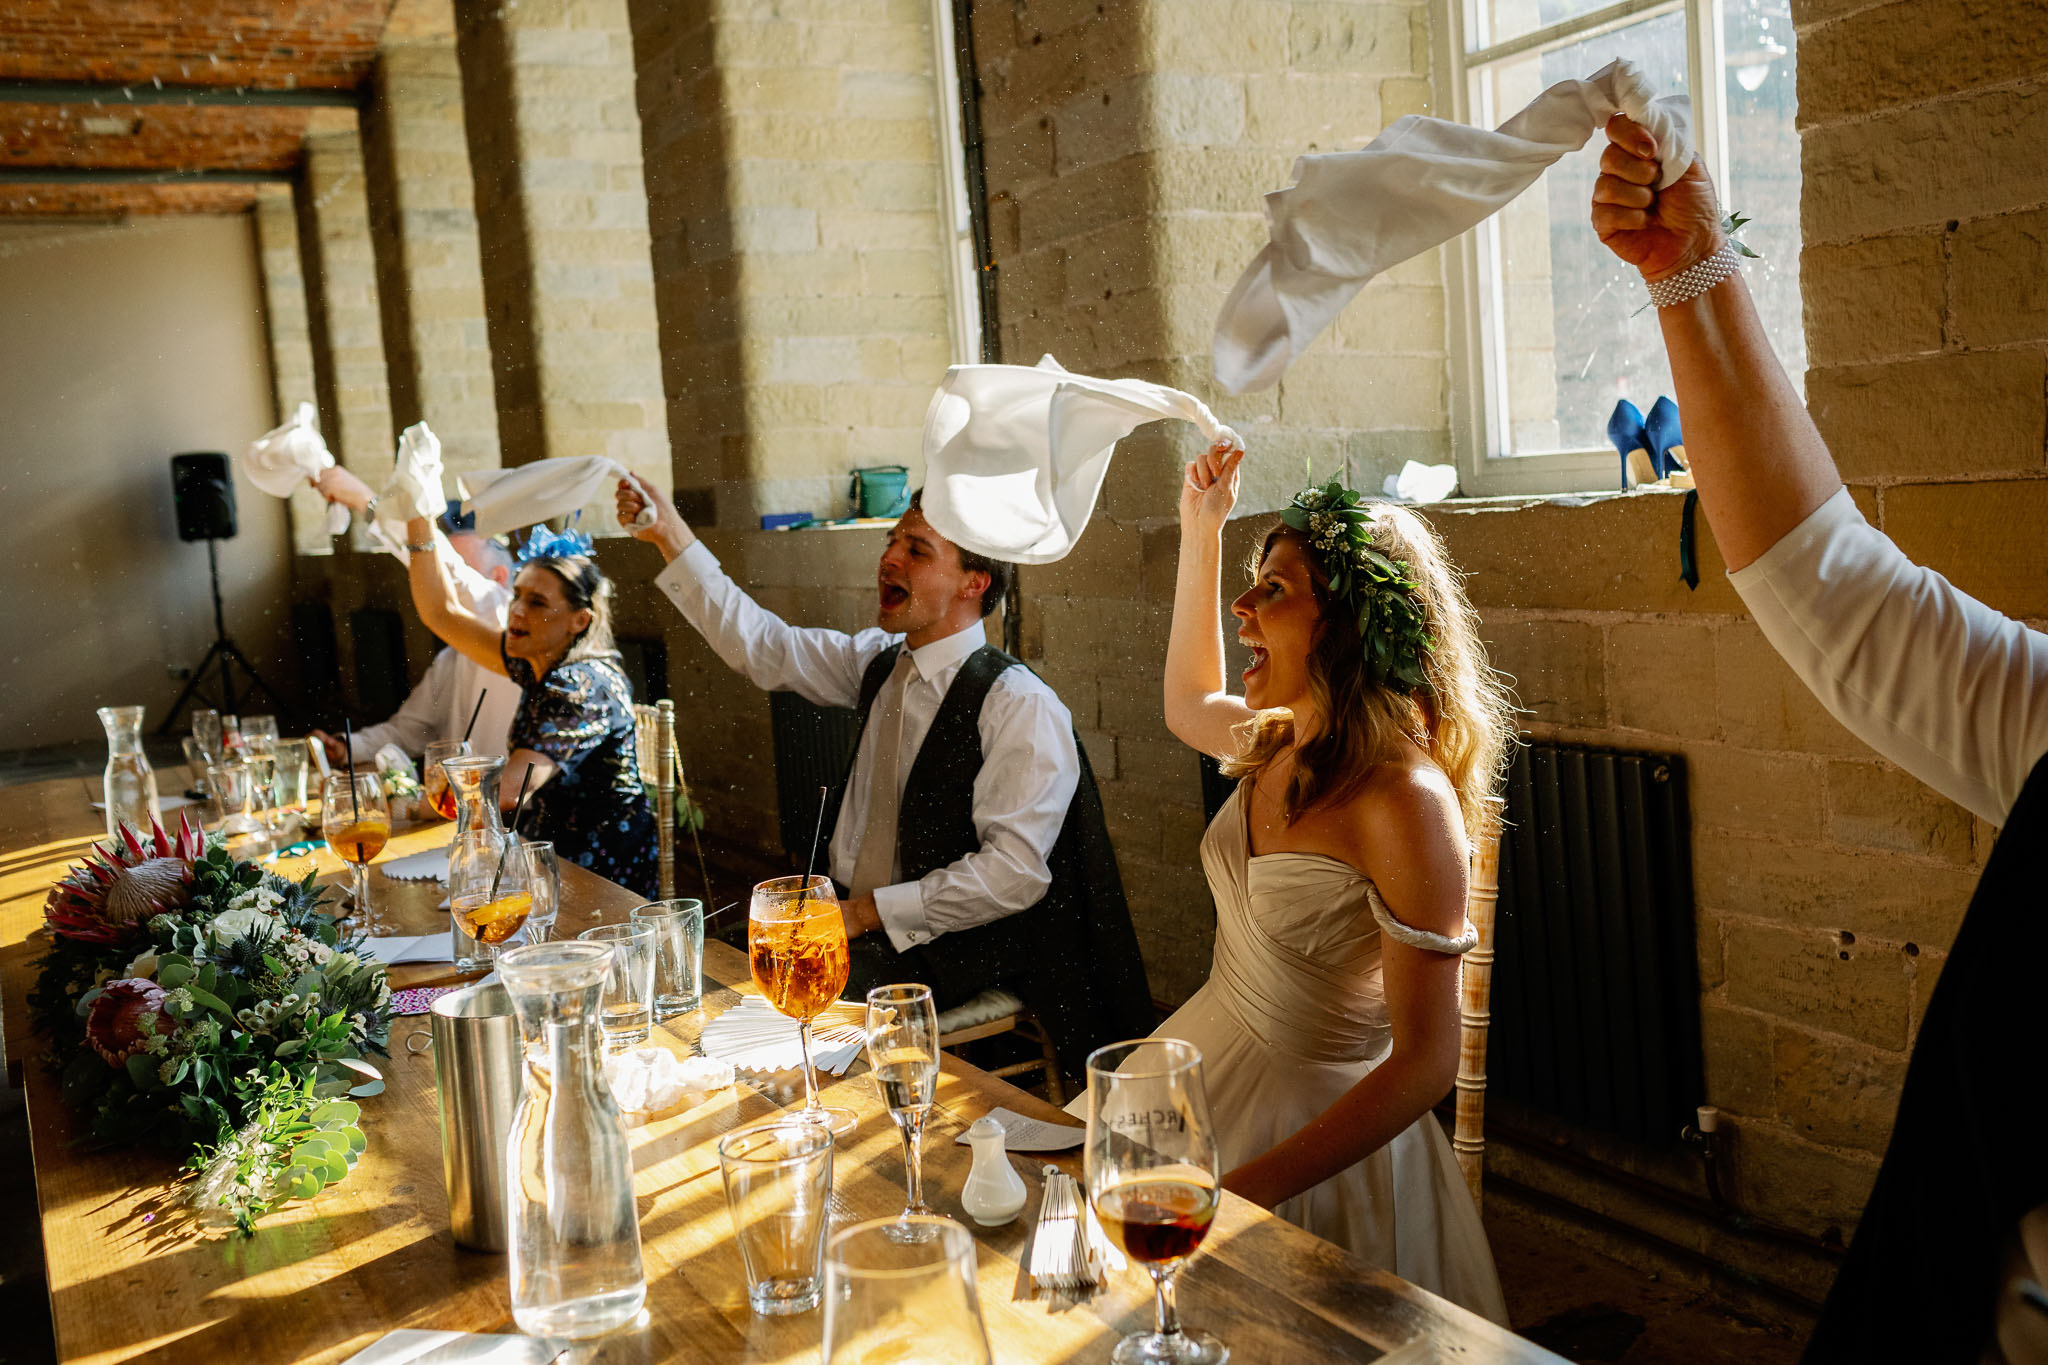 Great Pictures of singing waiters at a wedding 